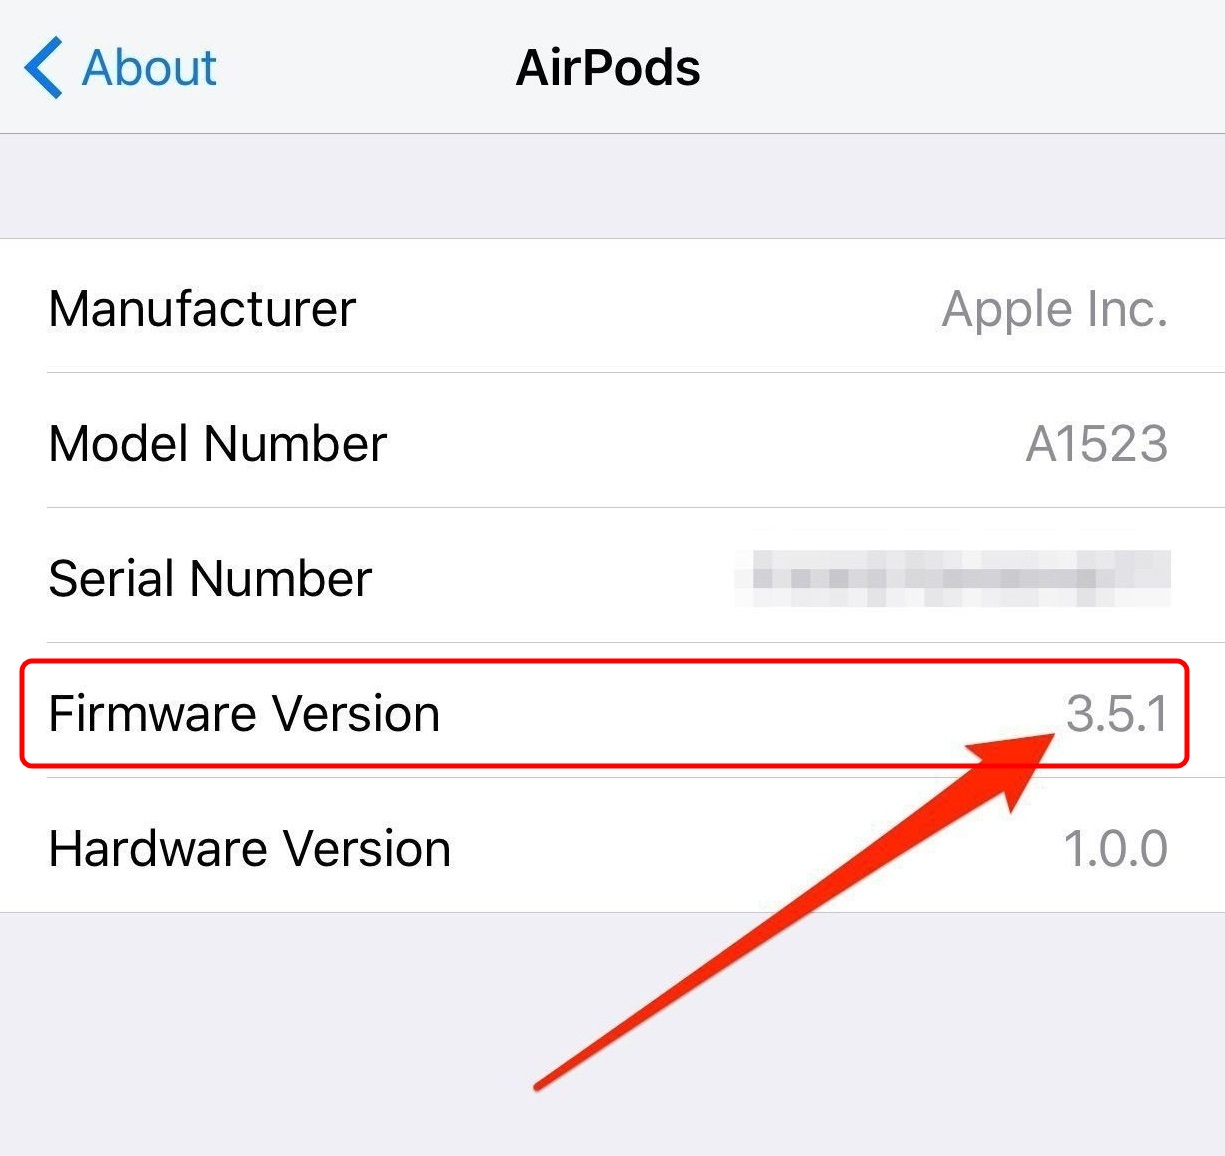 AirPods Install latest Firmware 3.5.1